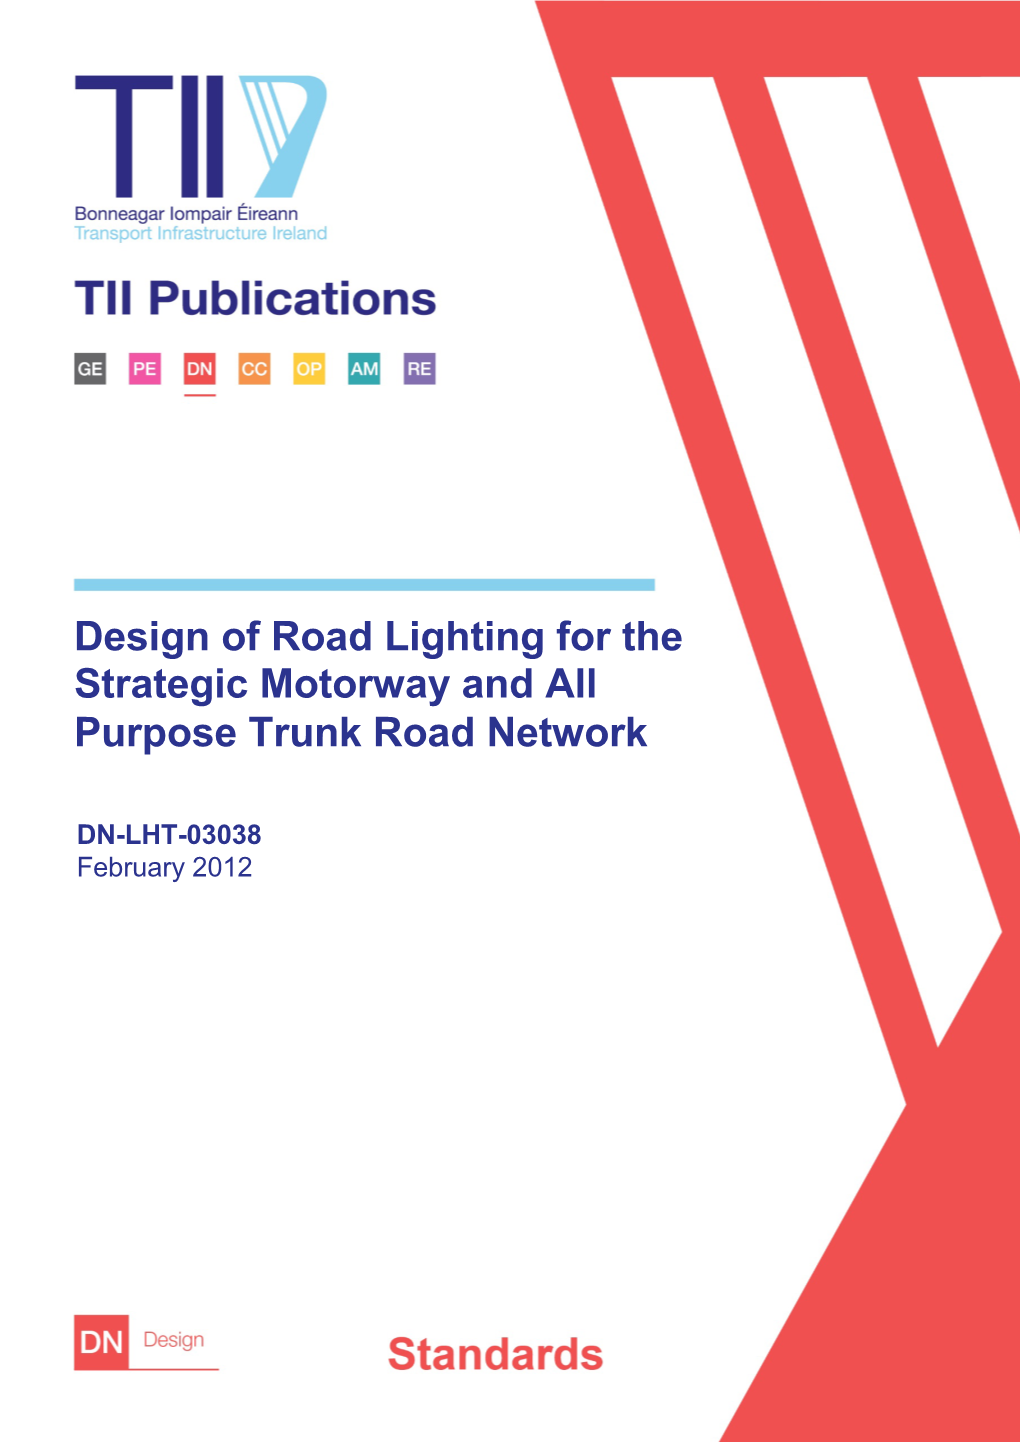 Design of Road Lighting for the Strategic Motorway and All Purpose Trunk Road Network